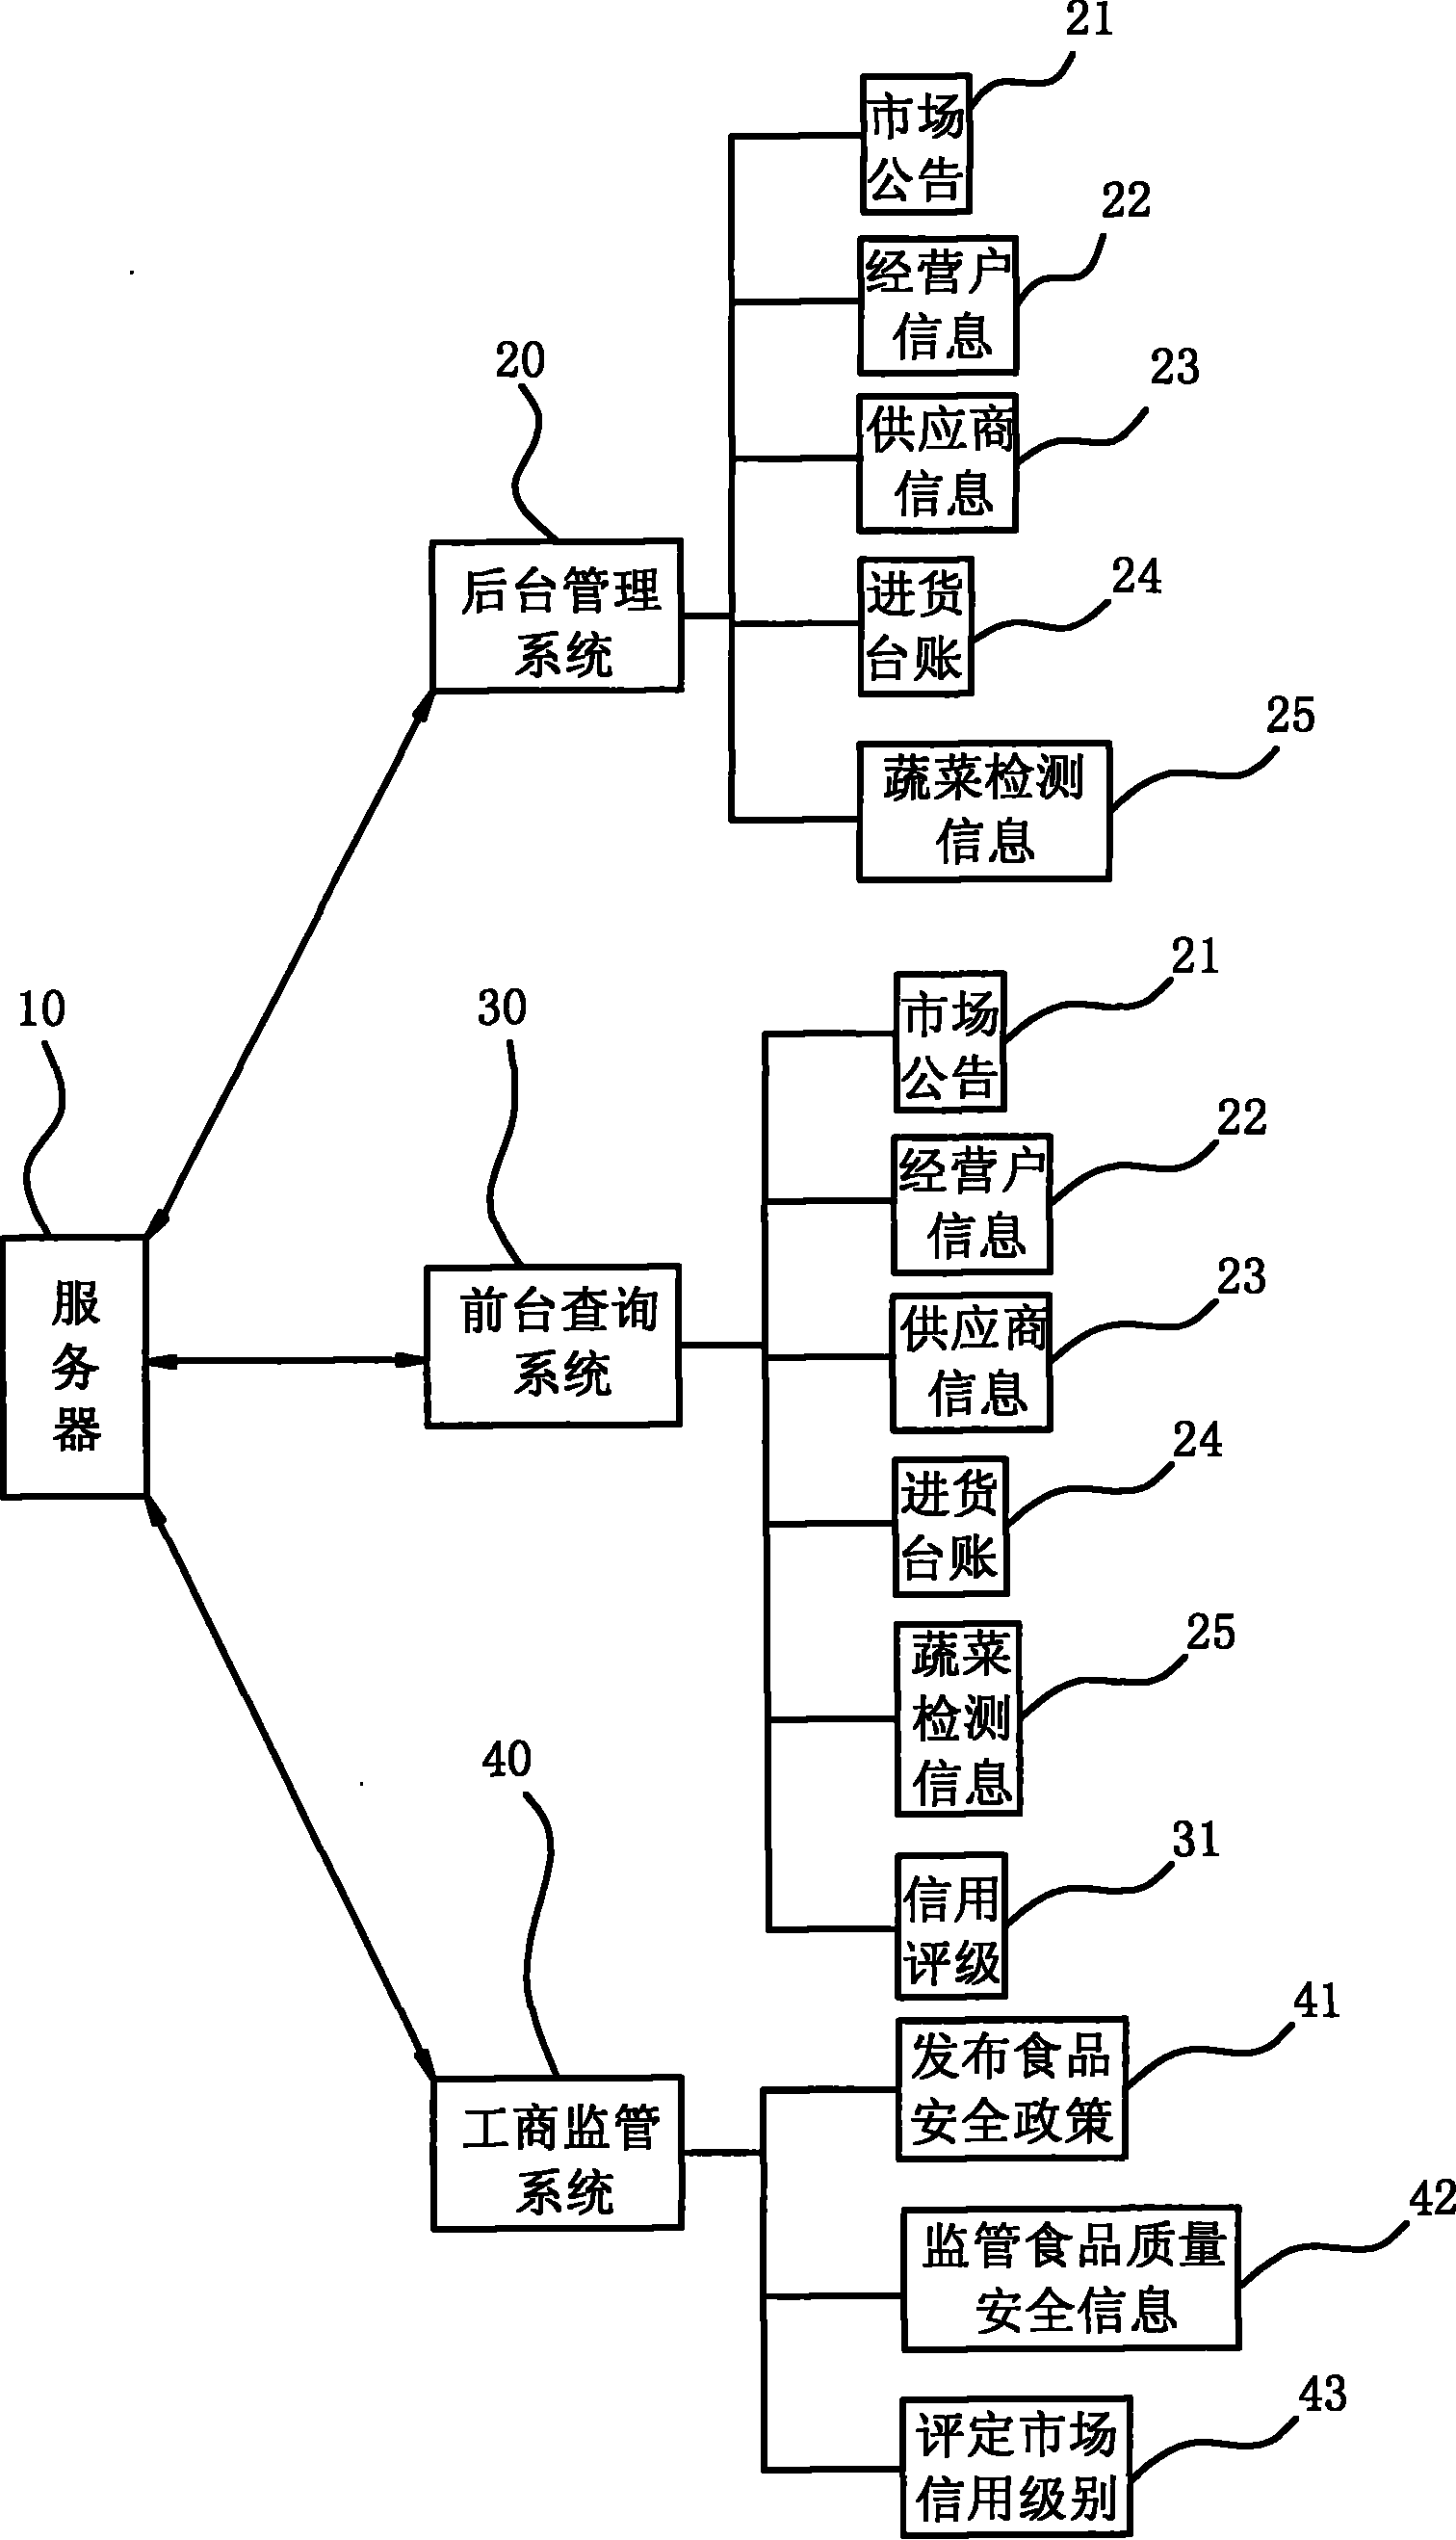 Open fair food quality safety information monitoring and inquiring system